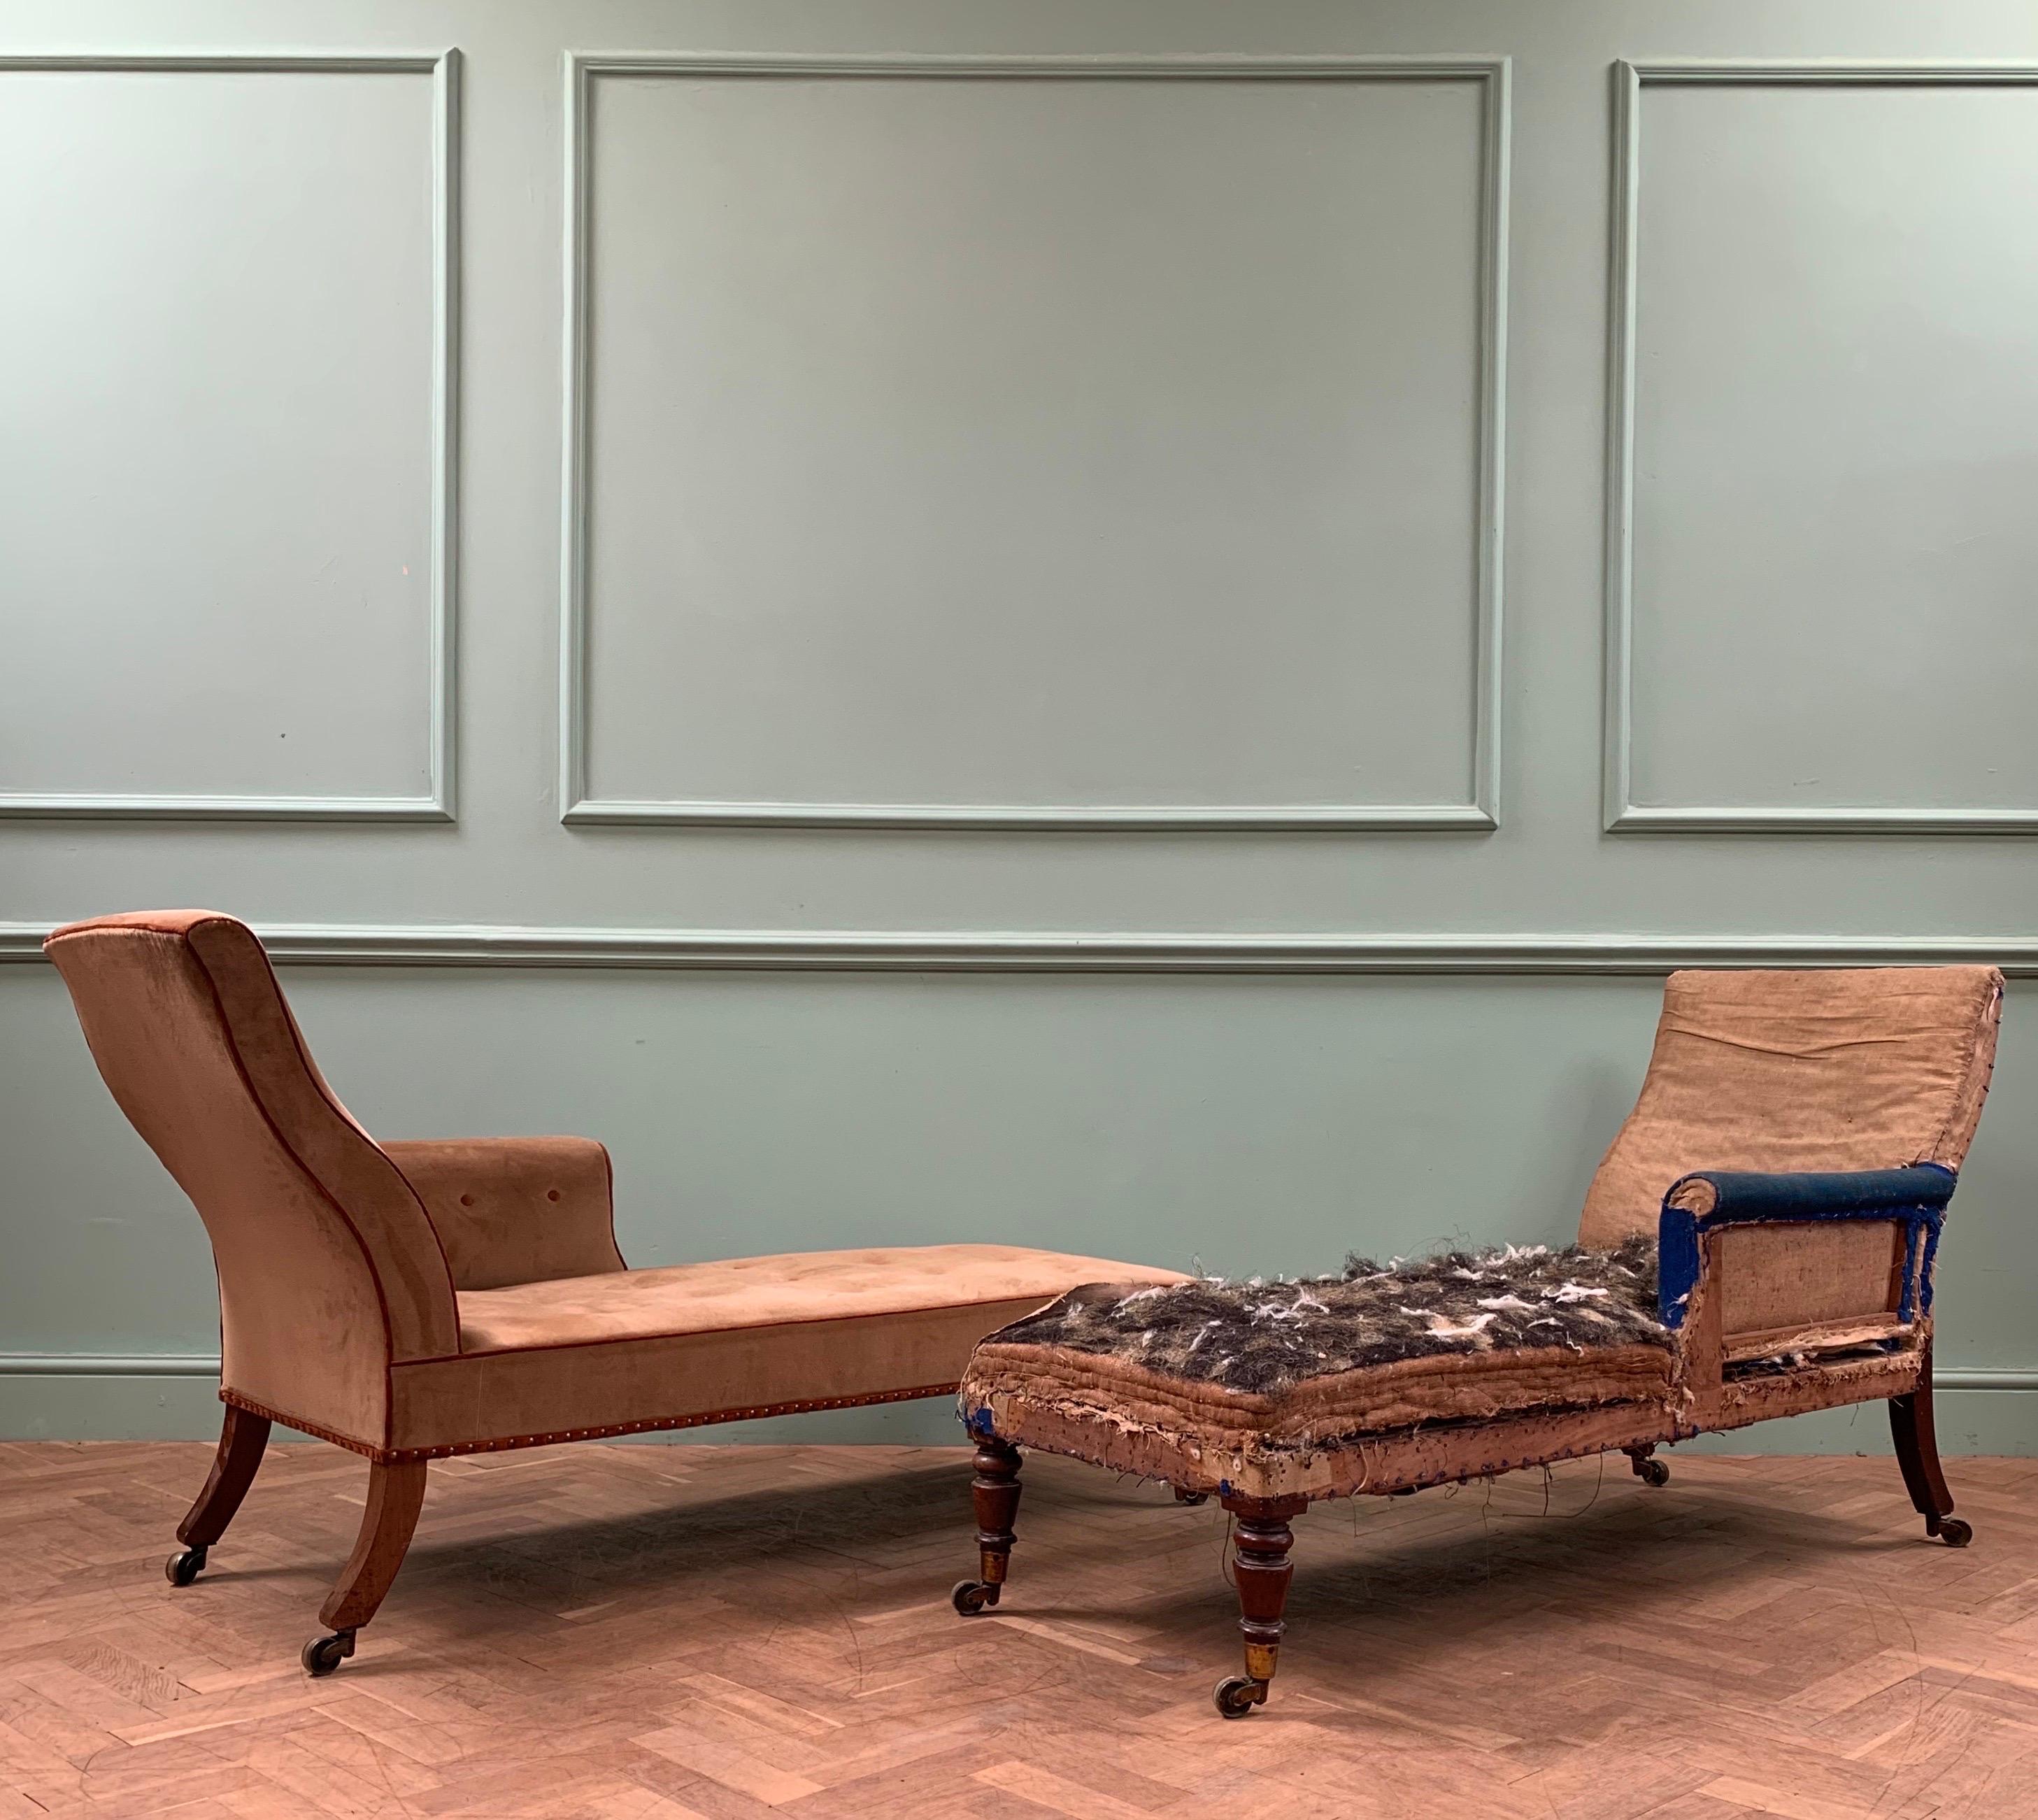 A pair of highly elegant English regency daybeds, with an S shaped backrest, terminating in mahogany sabre legs and brass castors made by Cope and Collinson, each with a single arm rest and the highest quality mahogany to turned front legs. 

For